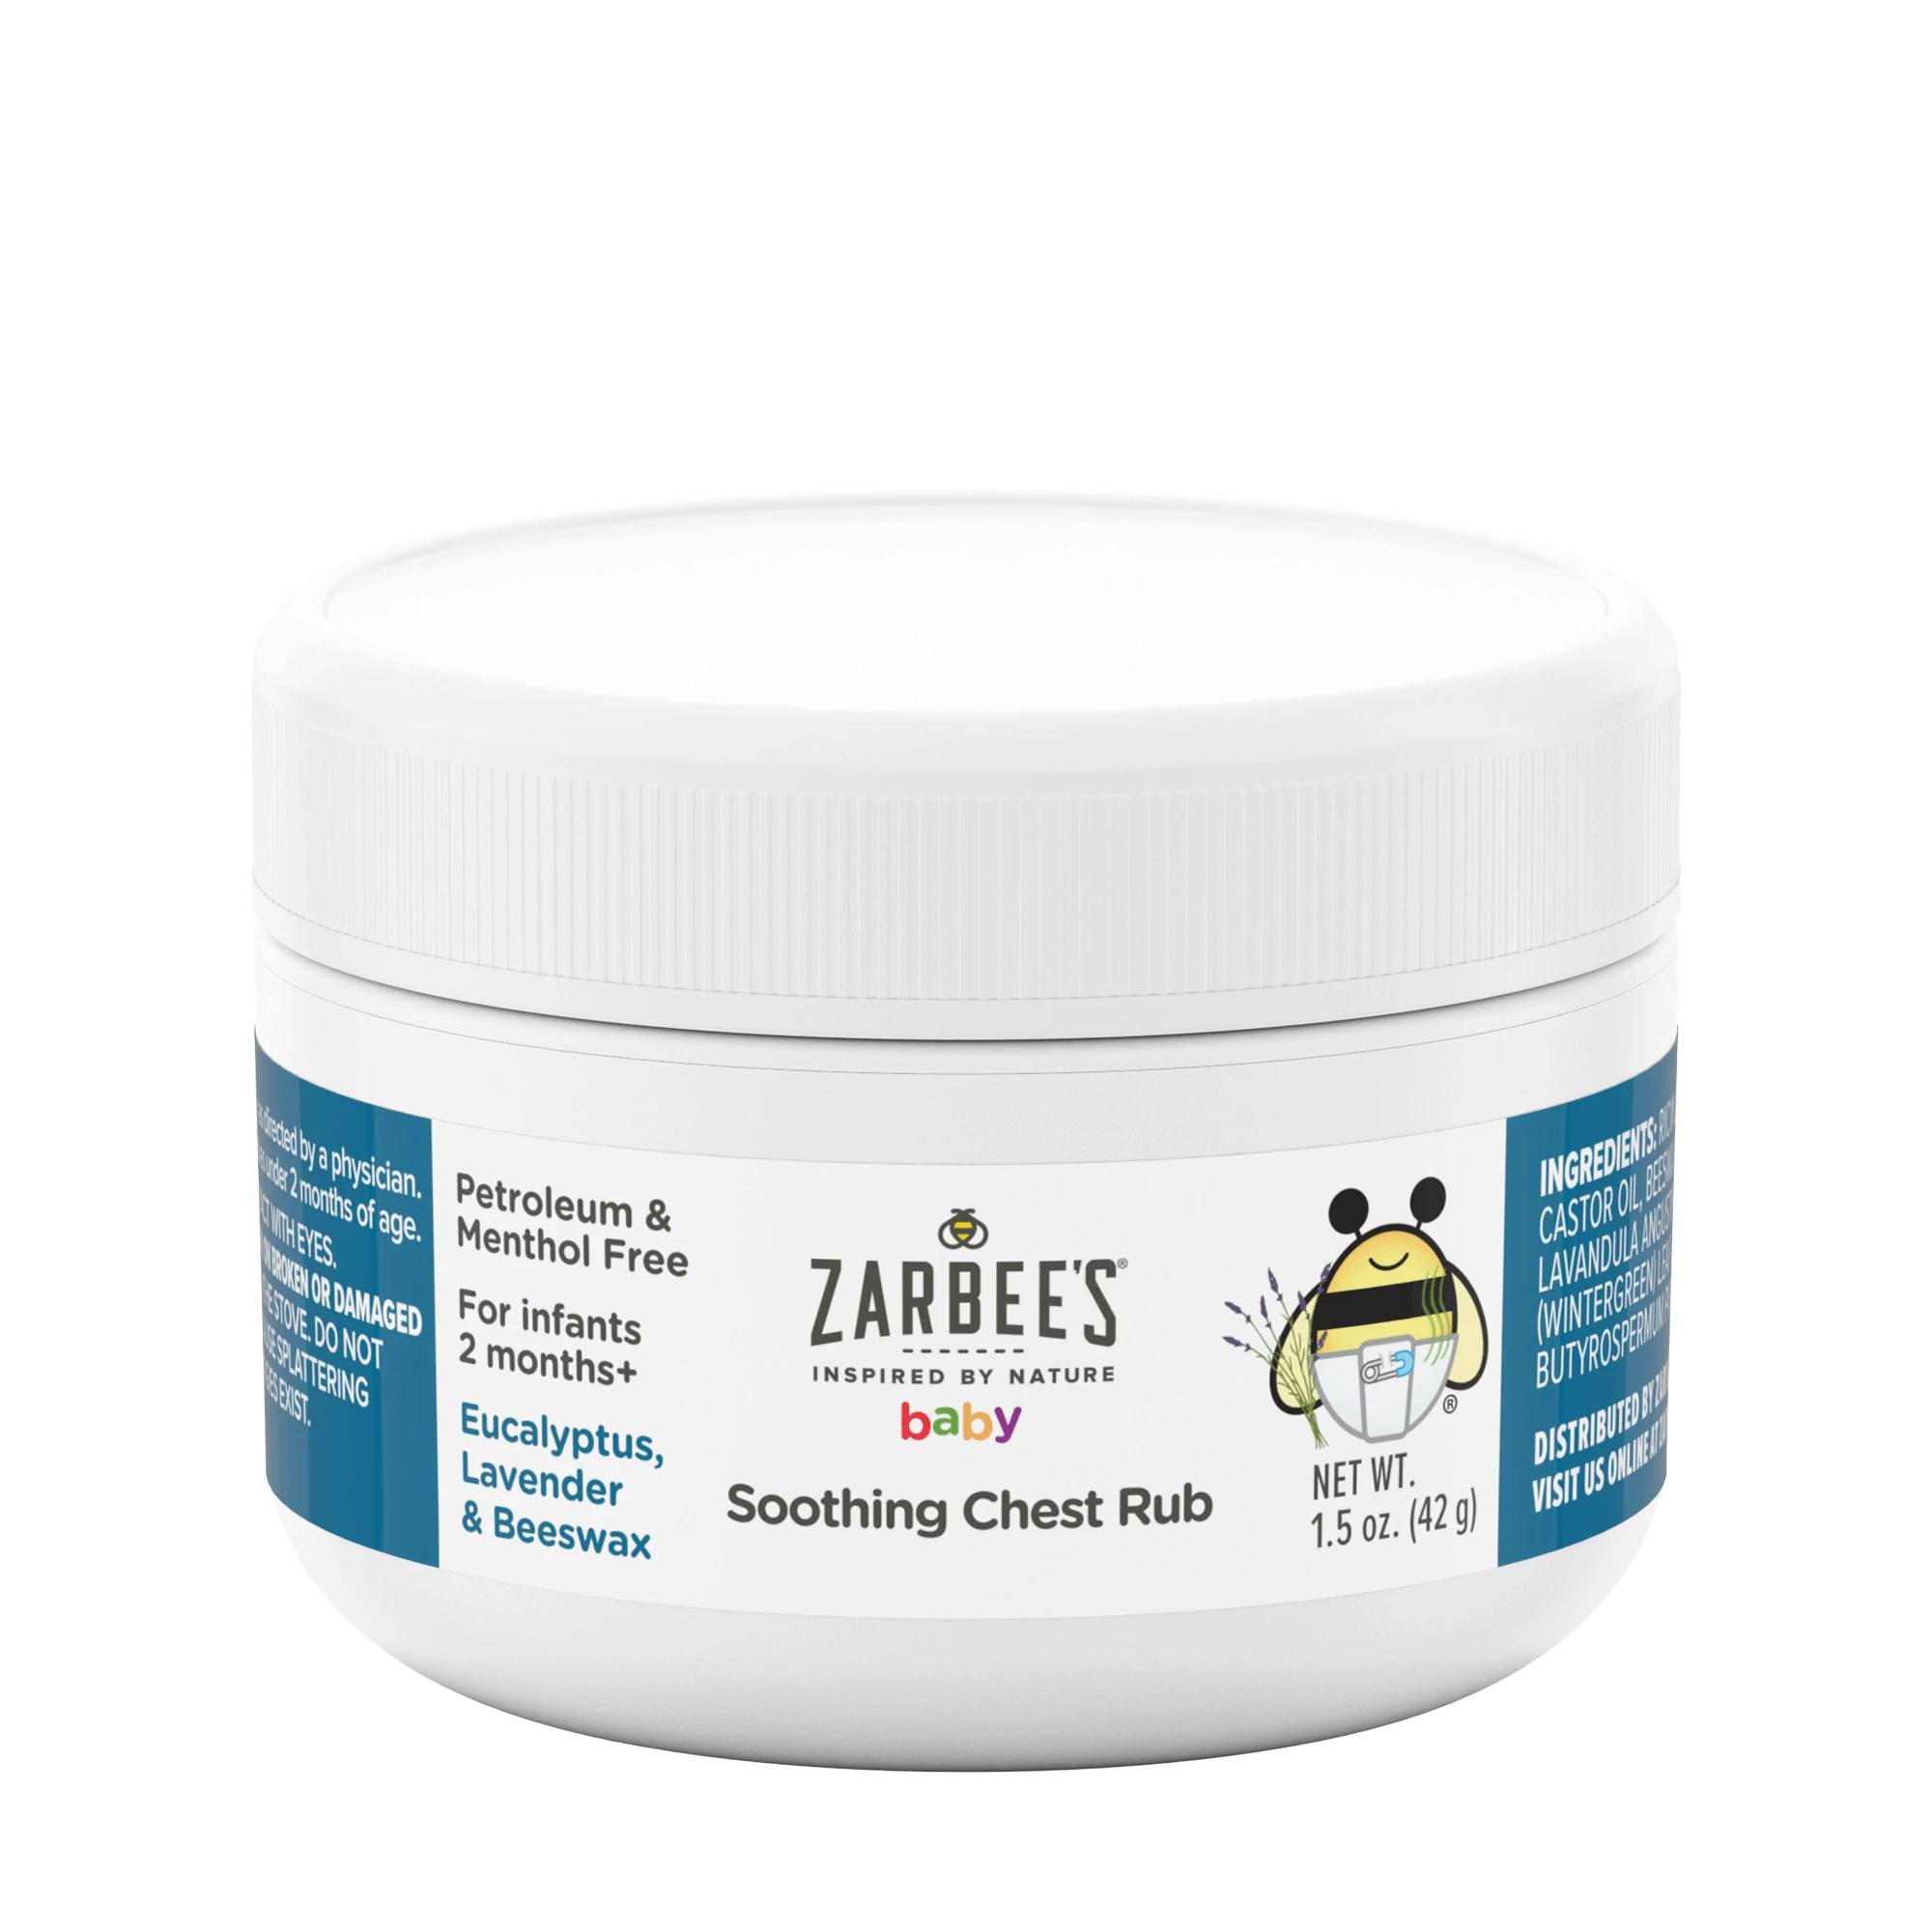 https://www.zarbees.com/sites/zarbees_us/files/product-images/541_zar_858438005414_us_baby_sooth_chest_rub_euc_lav_beeswax_1p5oz_oob1.webp